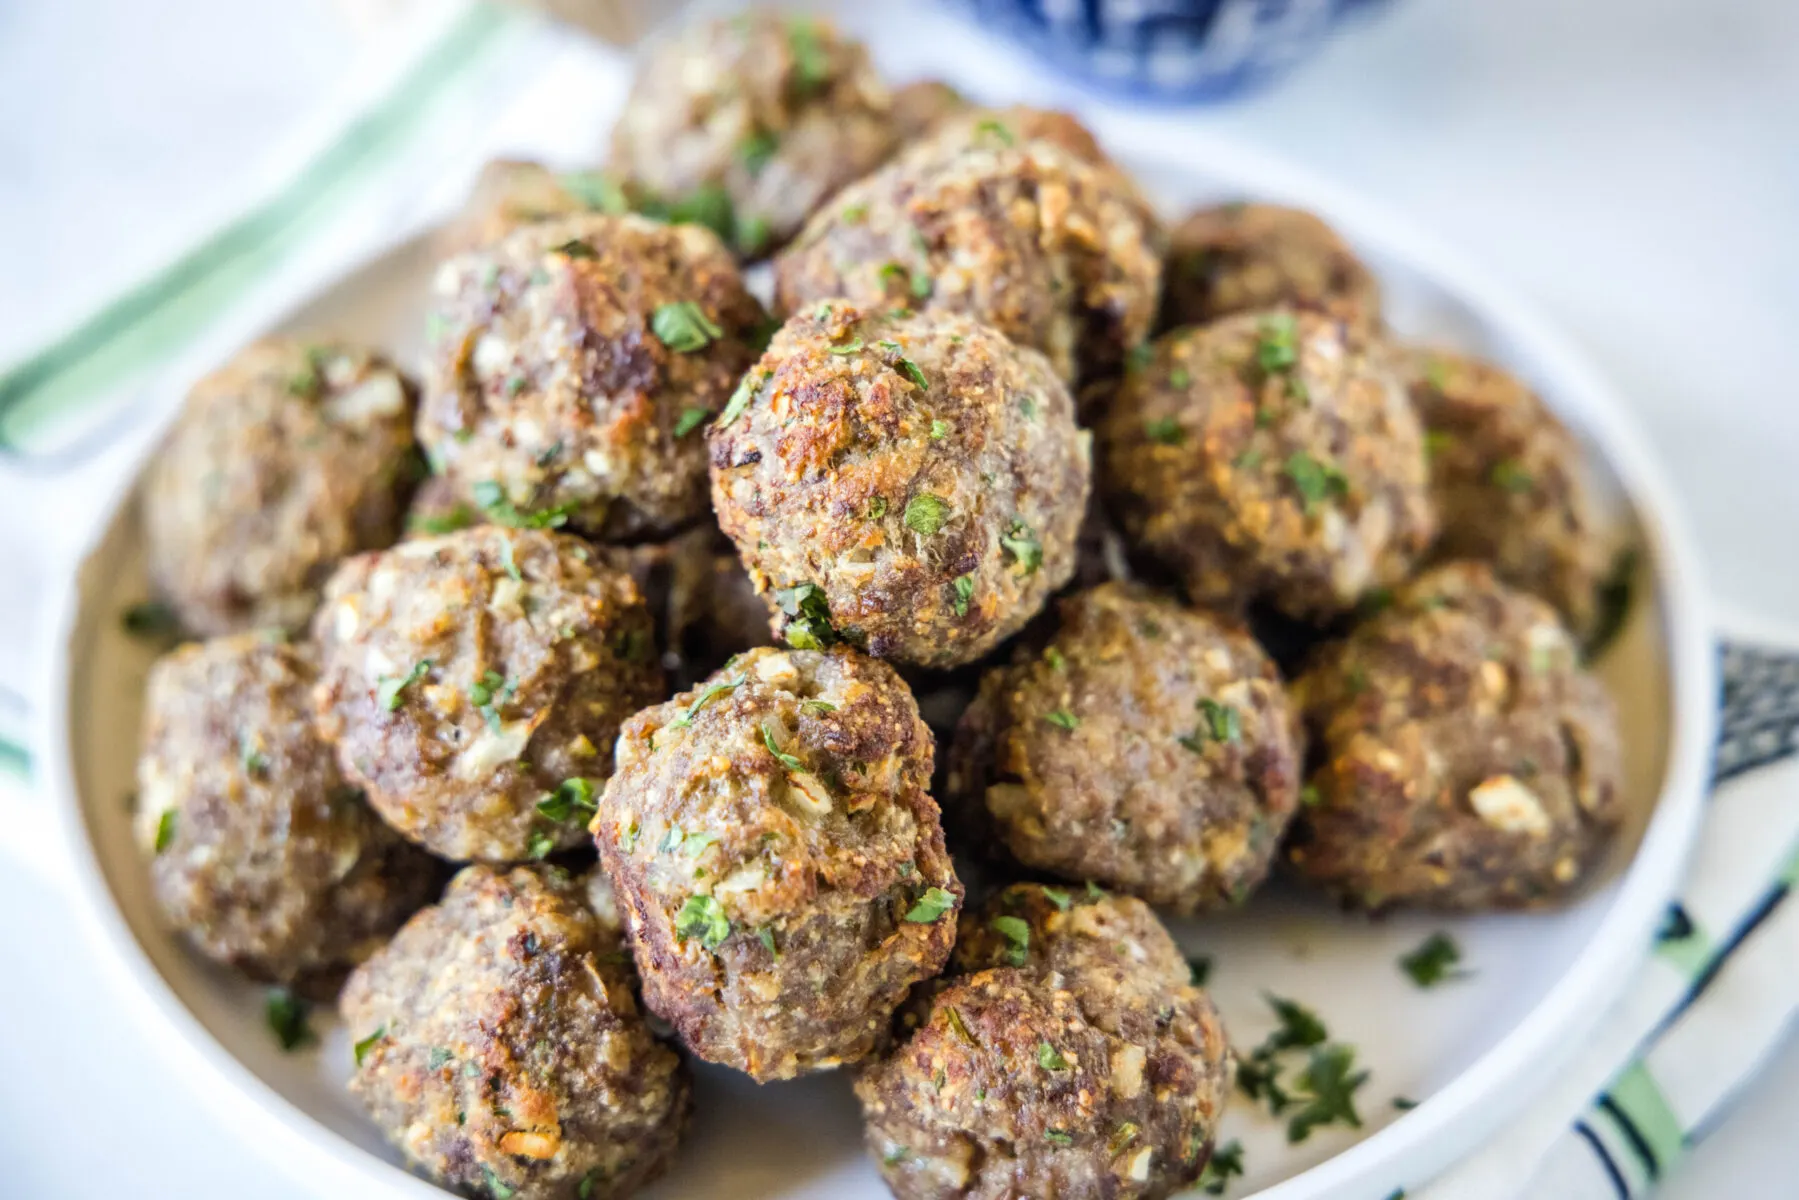 A plate of meatballs